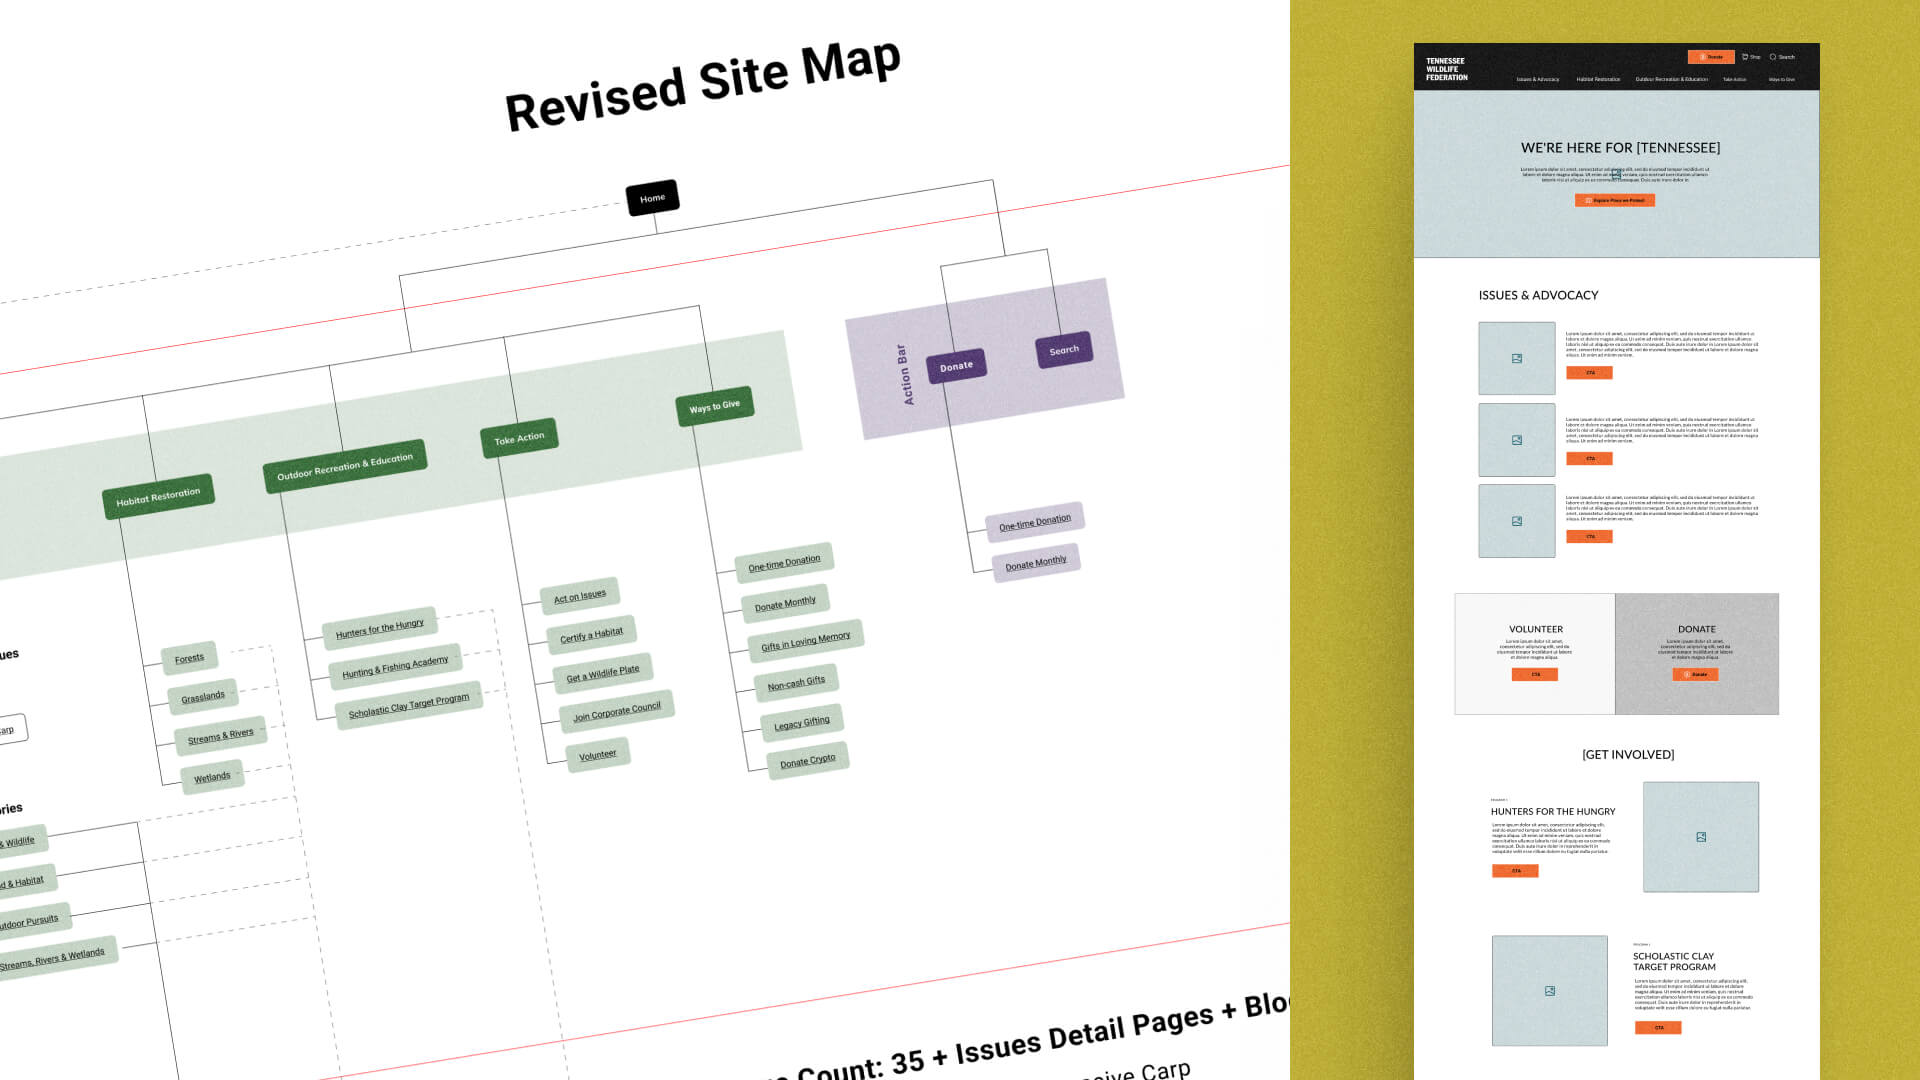 Revised site map showing the new structure for the website.